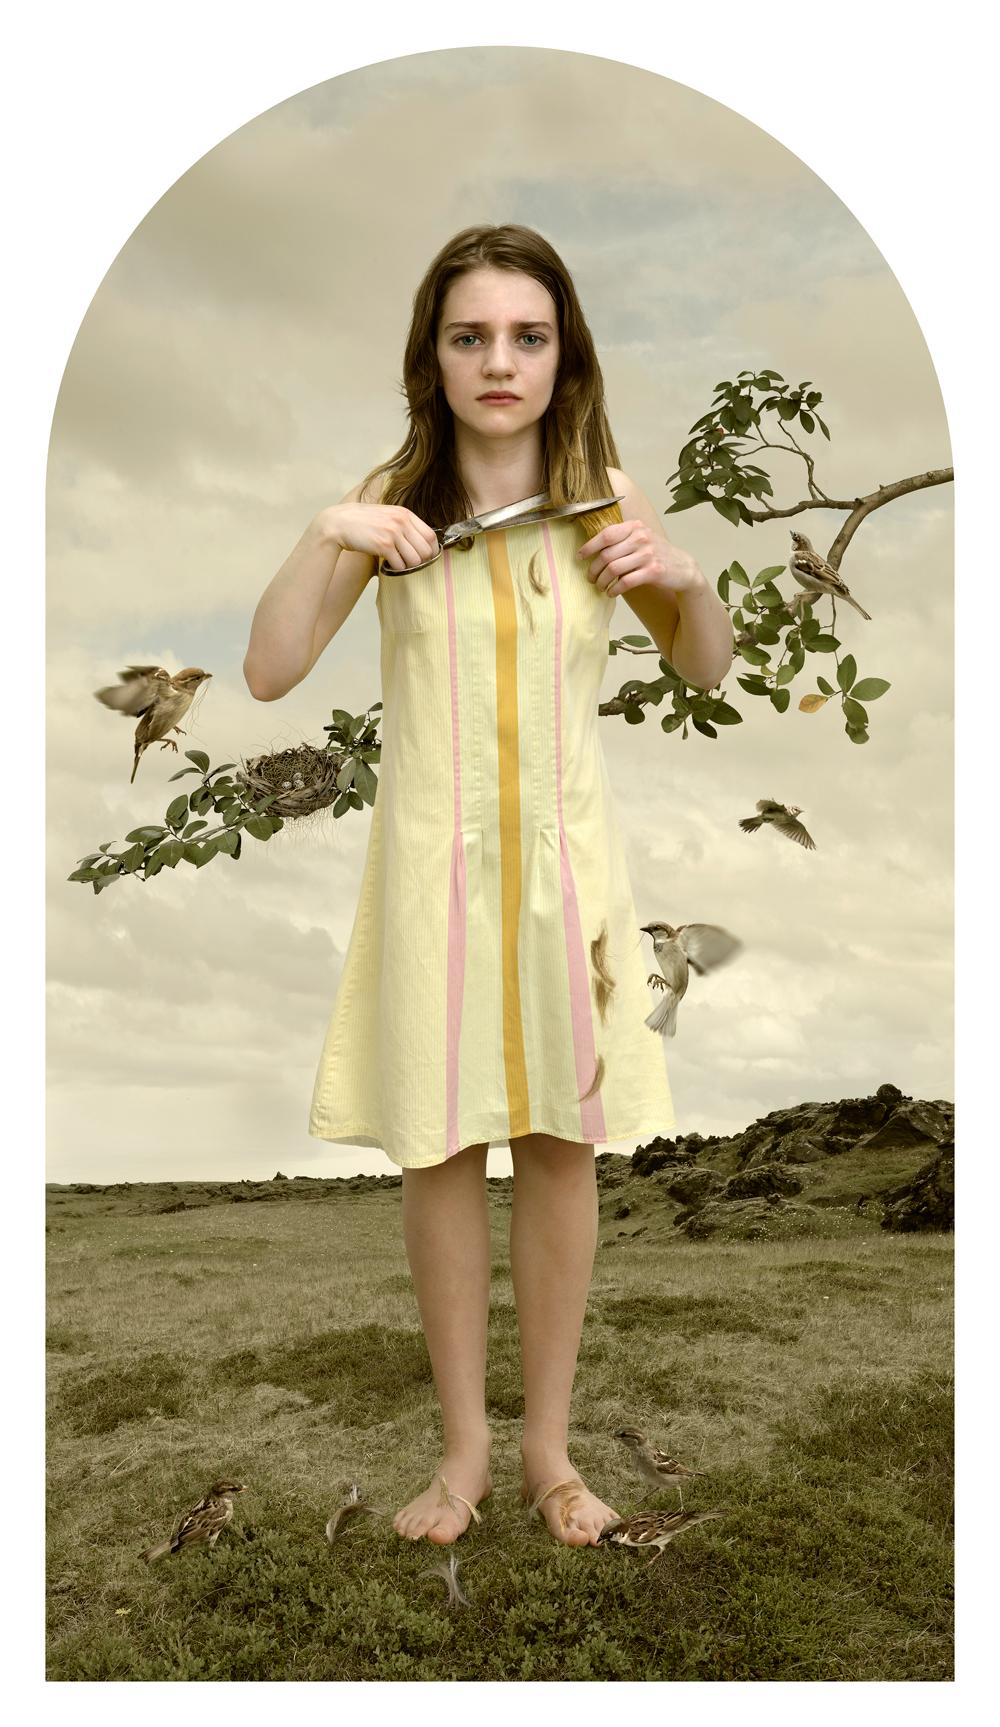 Tom Chambers Color Photograph - Nesting With Scissors